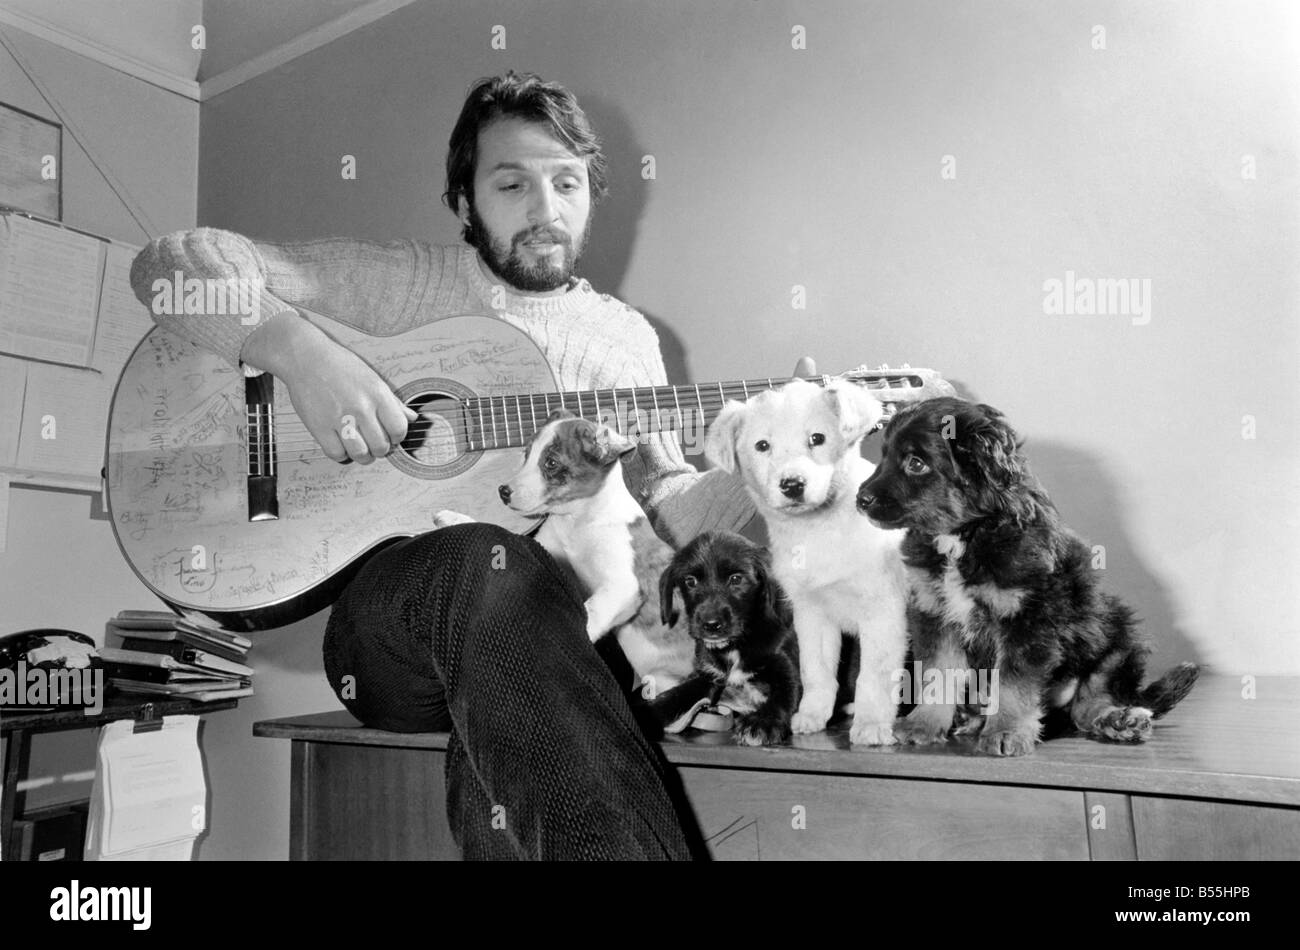 Salvatore Sangiorgi Italian singer and guitarist seen here at the RSPCA Home and Clinic Trenmare Gardens, London, singing to a pair of abandoned dogs December 1969 Z11924-001 Stock Photo